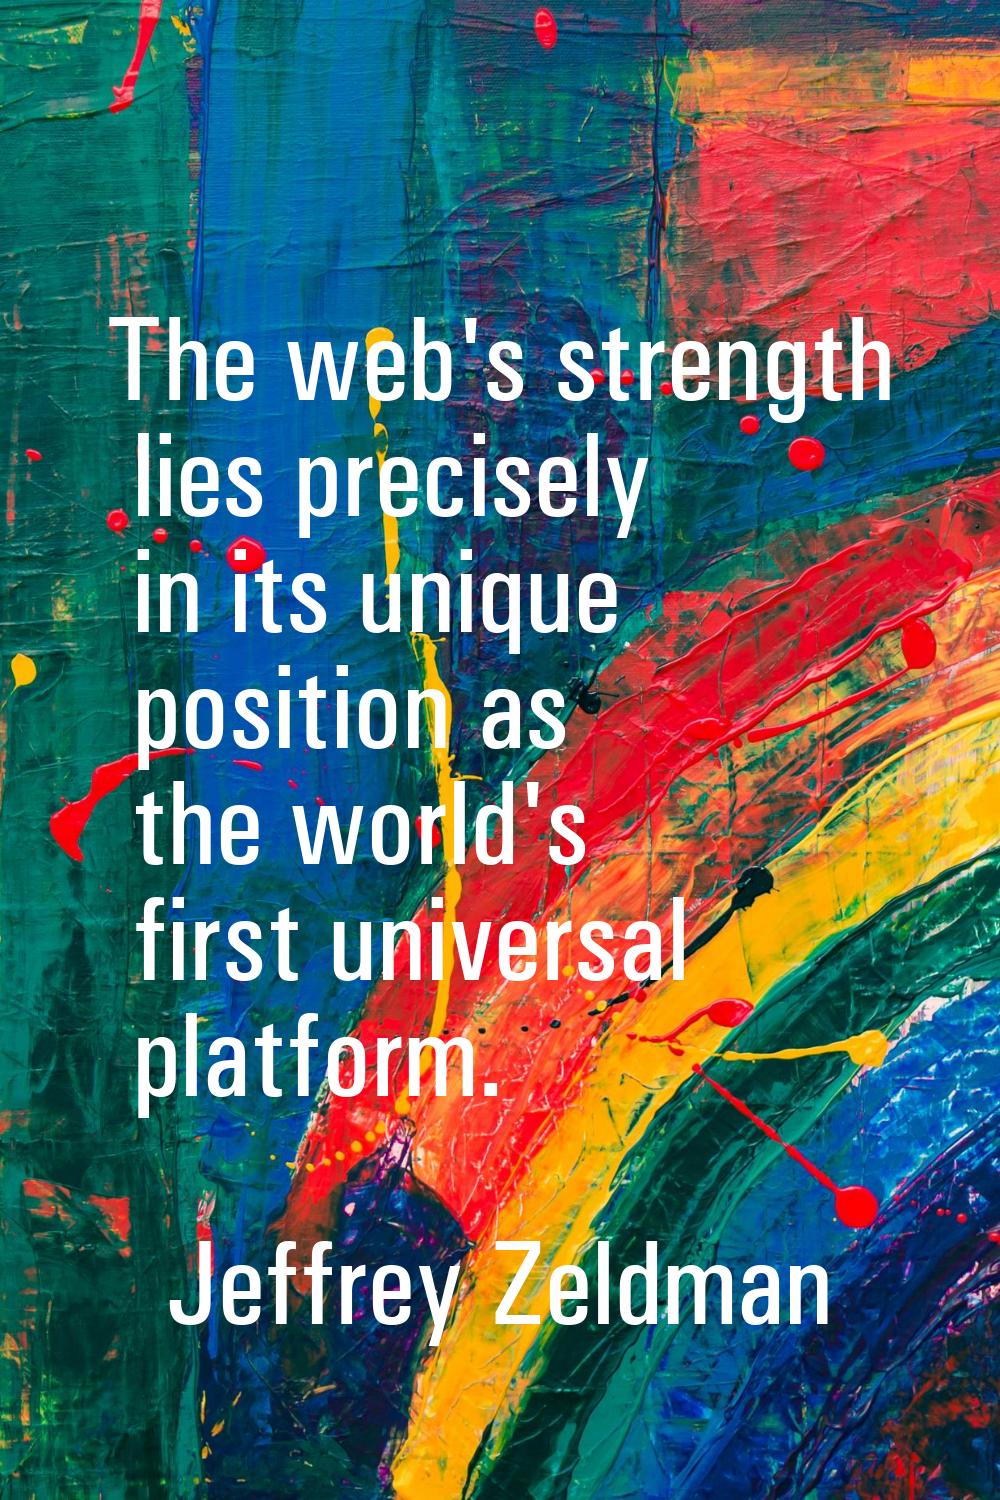 The web's strength lies precisely in its unique position as the world's first universal platform.